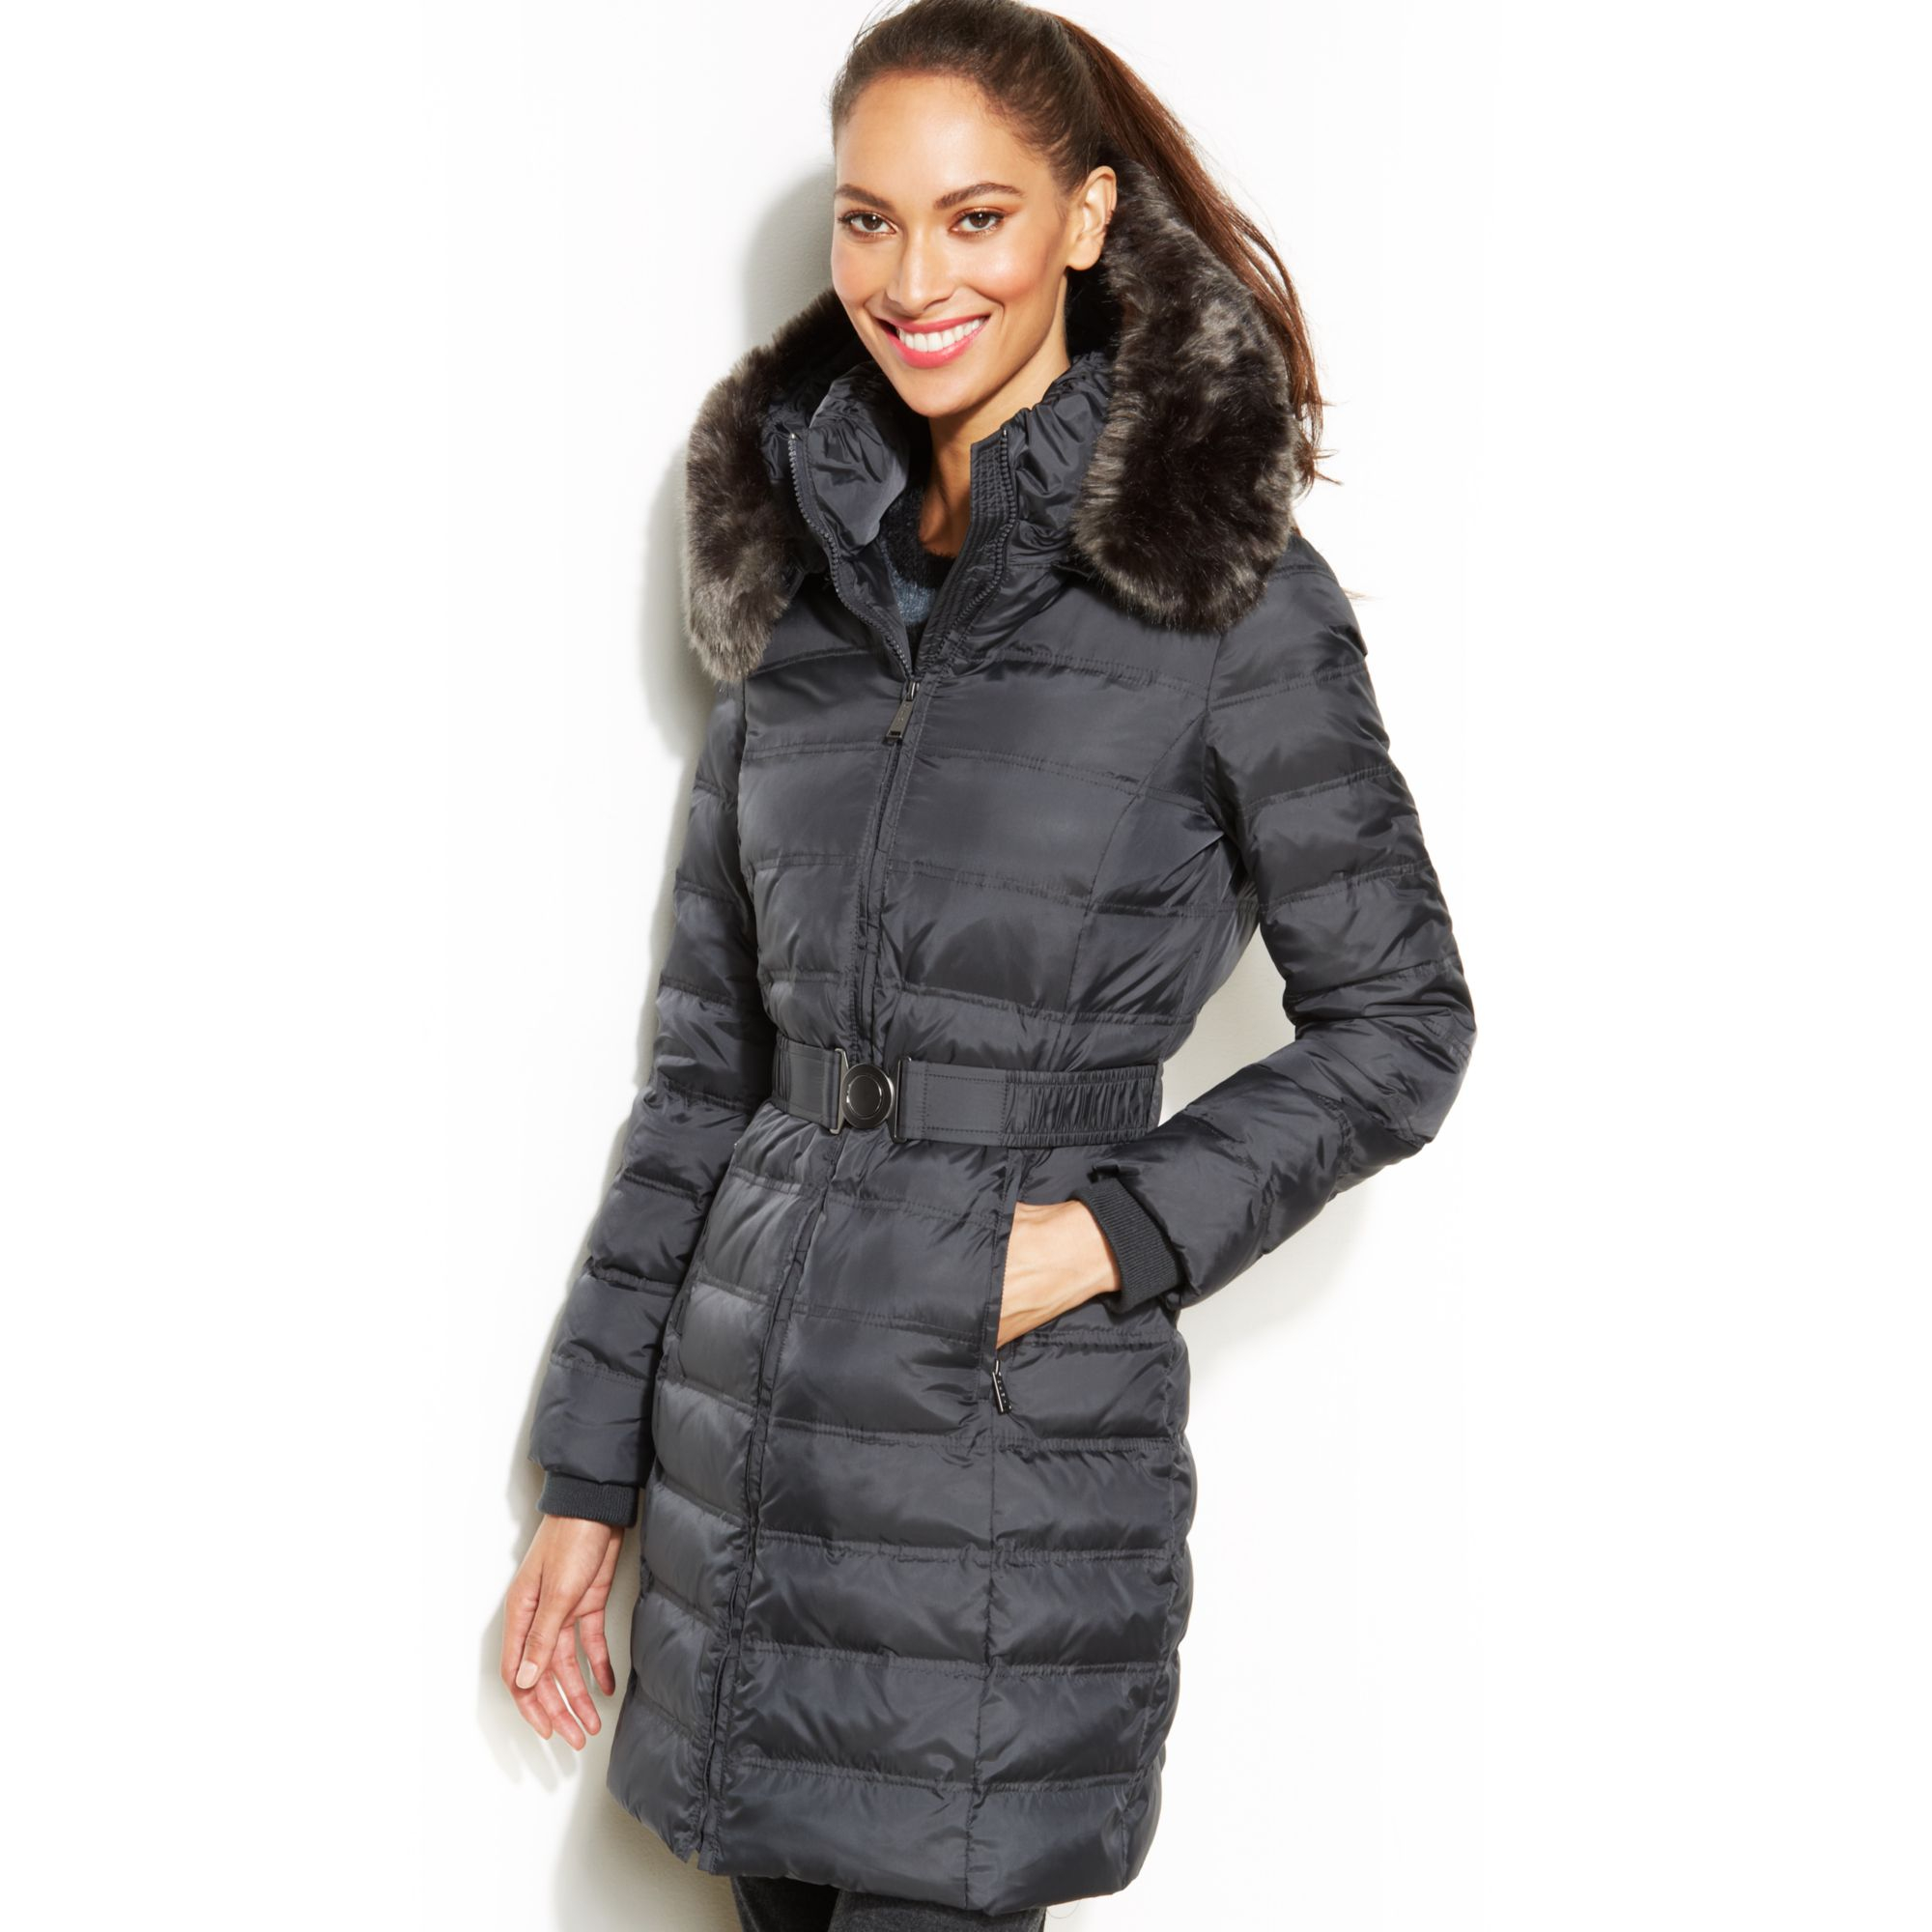 Dkny Hooded Faux-Fur-Trim Belted Down Puffer Coat in Gray (Grey) | Lyst